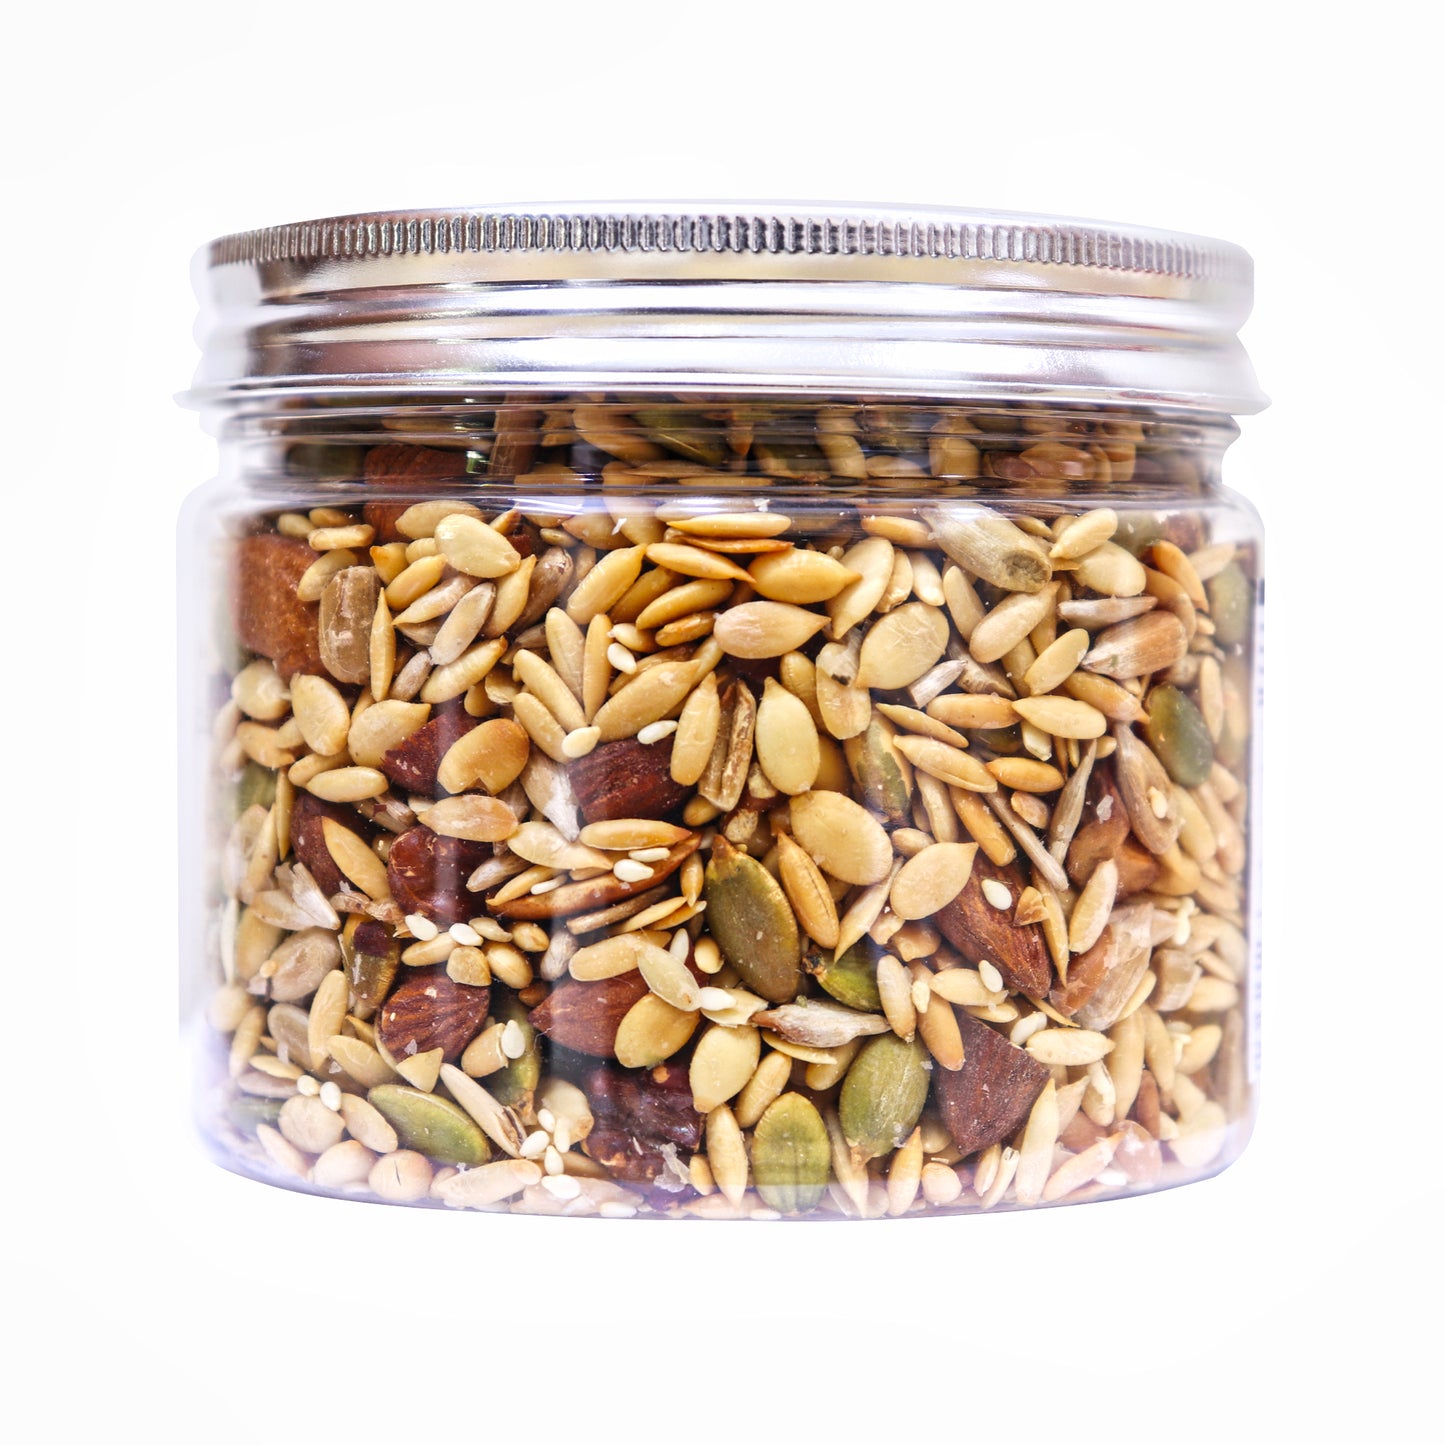 Superfood Power Mix of 9 Toasted Seeds & Nuts 250g